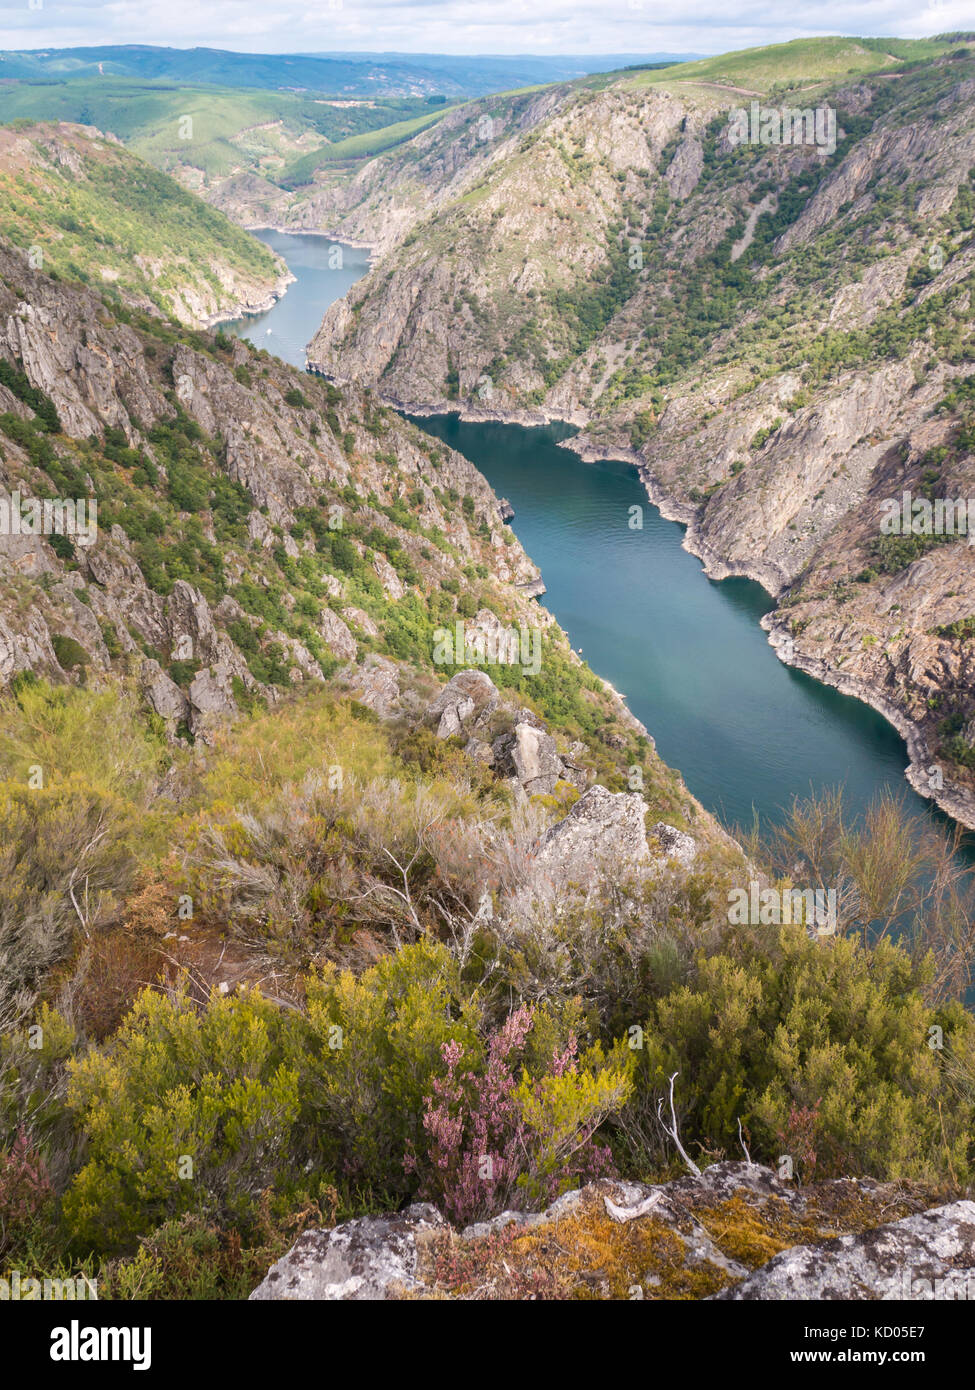 Heathery bank of Sil river in the province of Ourense, Galicia, Spain. Ribeira Sacra deep canyon landscape view from Vilouxe viewpoint. Stock Photo